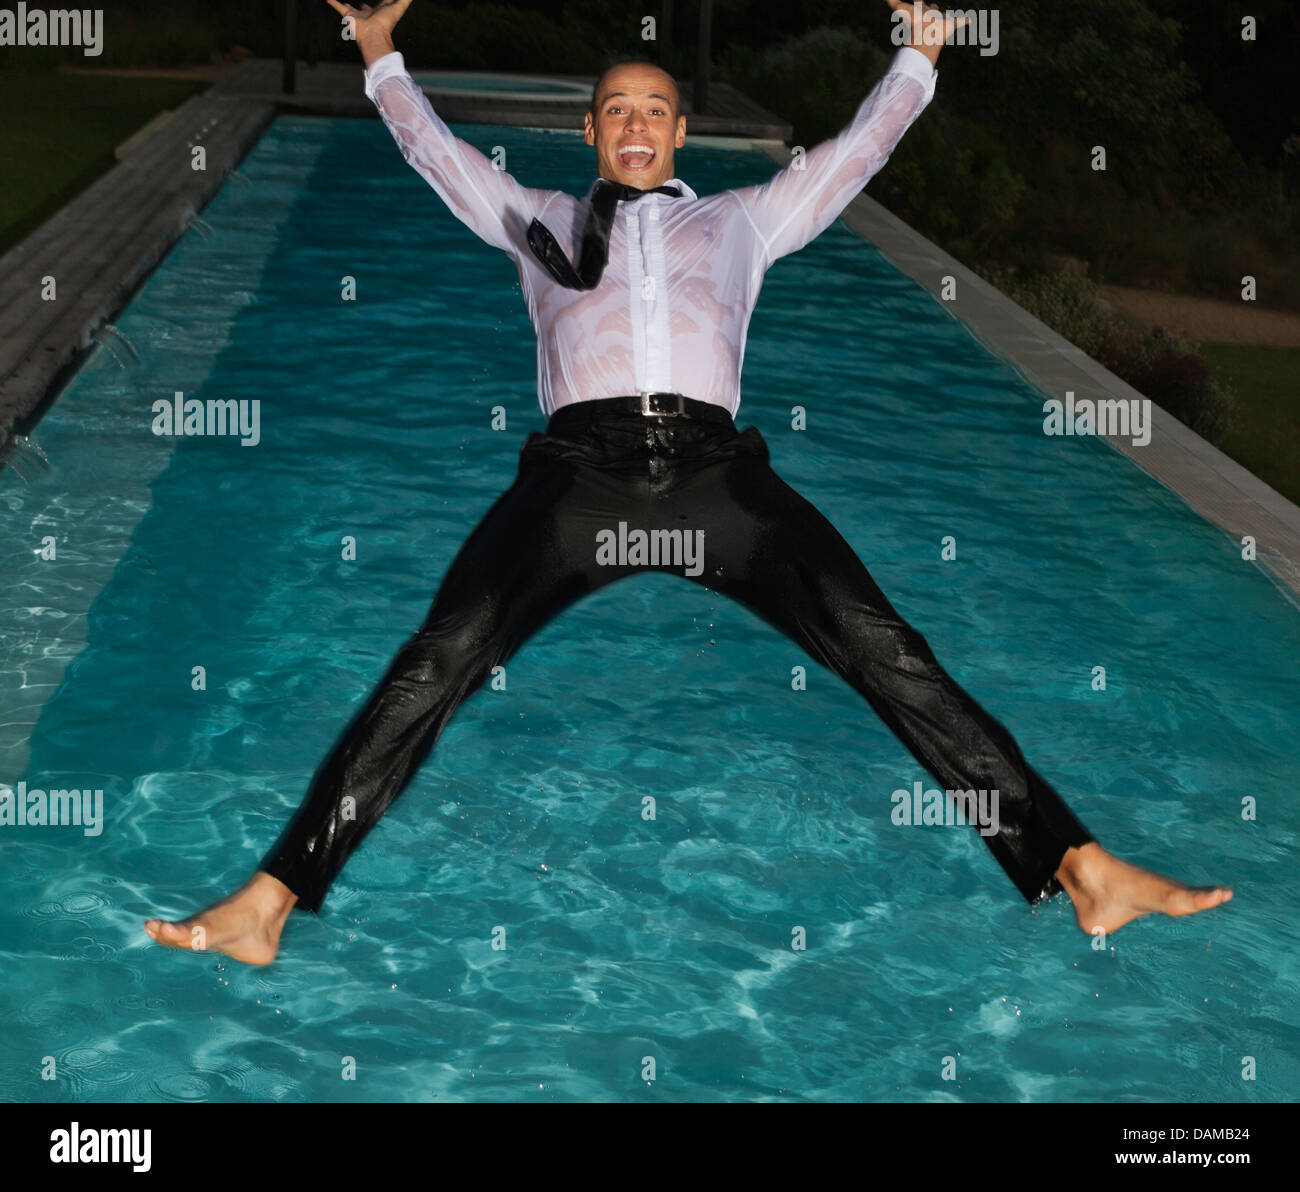 Fully dressed man jumping into swimming pool Stock Photo